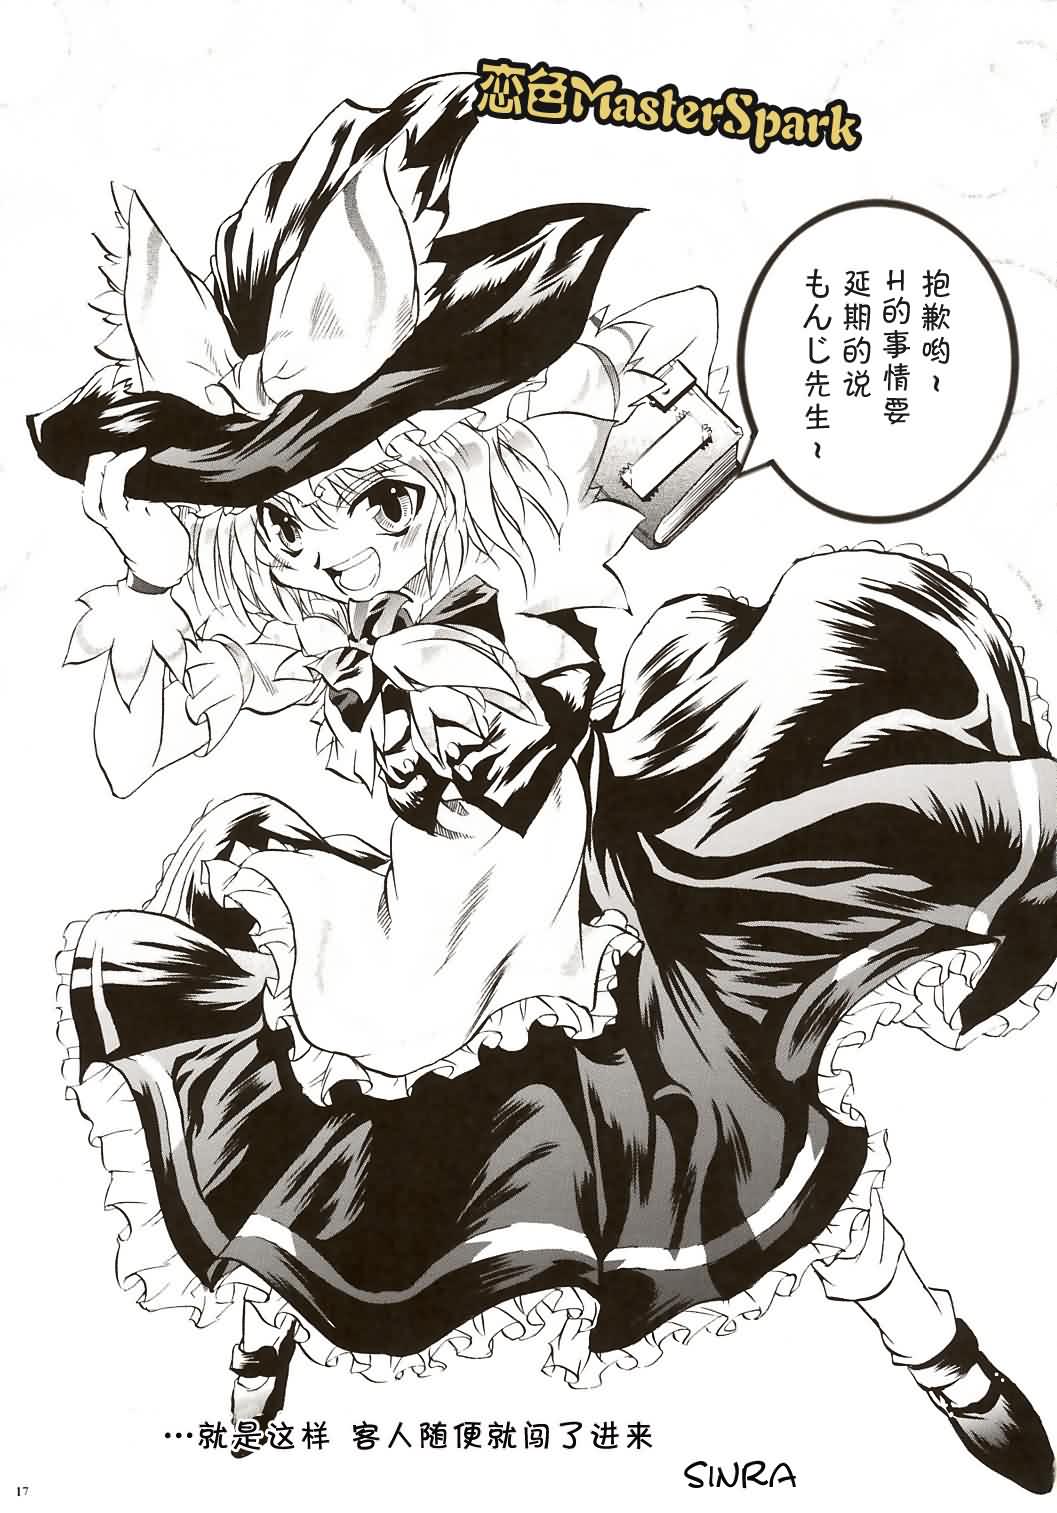 (CR36) [DPS no Doreitachi(Monji,SINRA )] Touhou Love Pattern - Secrets of Maid and Witch (Touhou Project) (chinese) (CR36) [DPSの奴隷達(もんじ,SINRA)] 東方恋模様 メイドと魔法使いの秘め事 (東方Project) [东方小吃店]